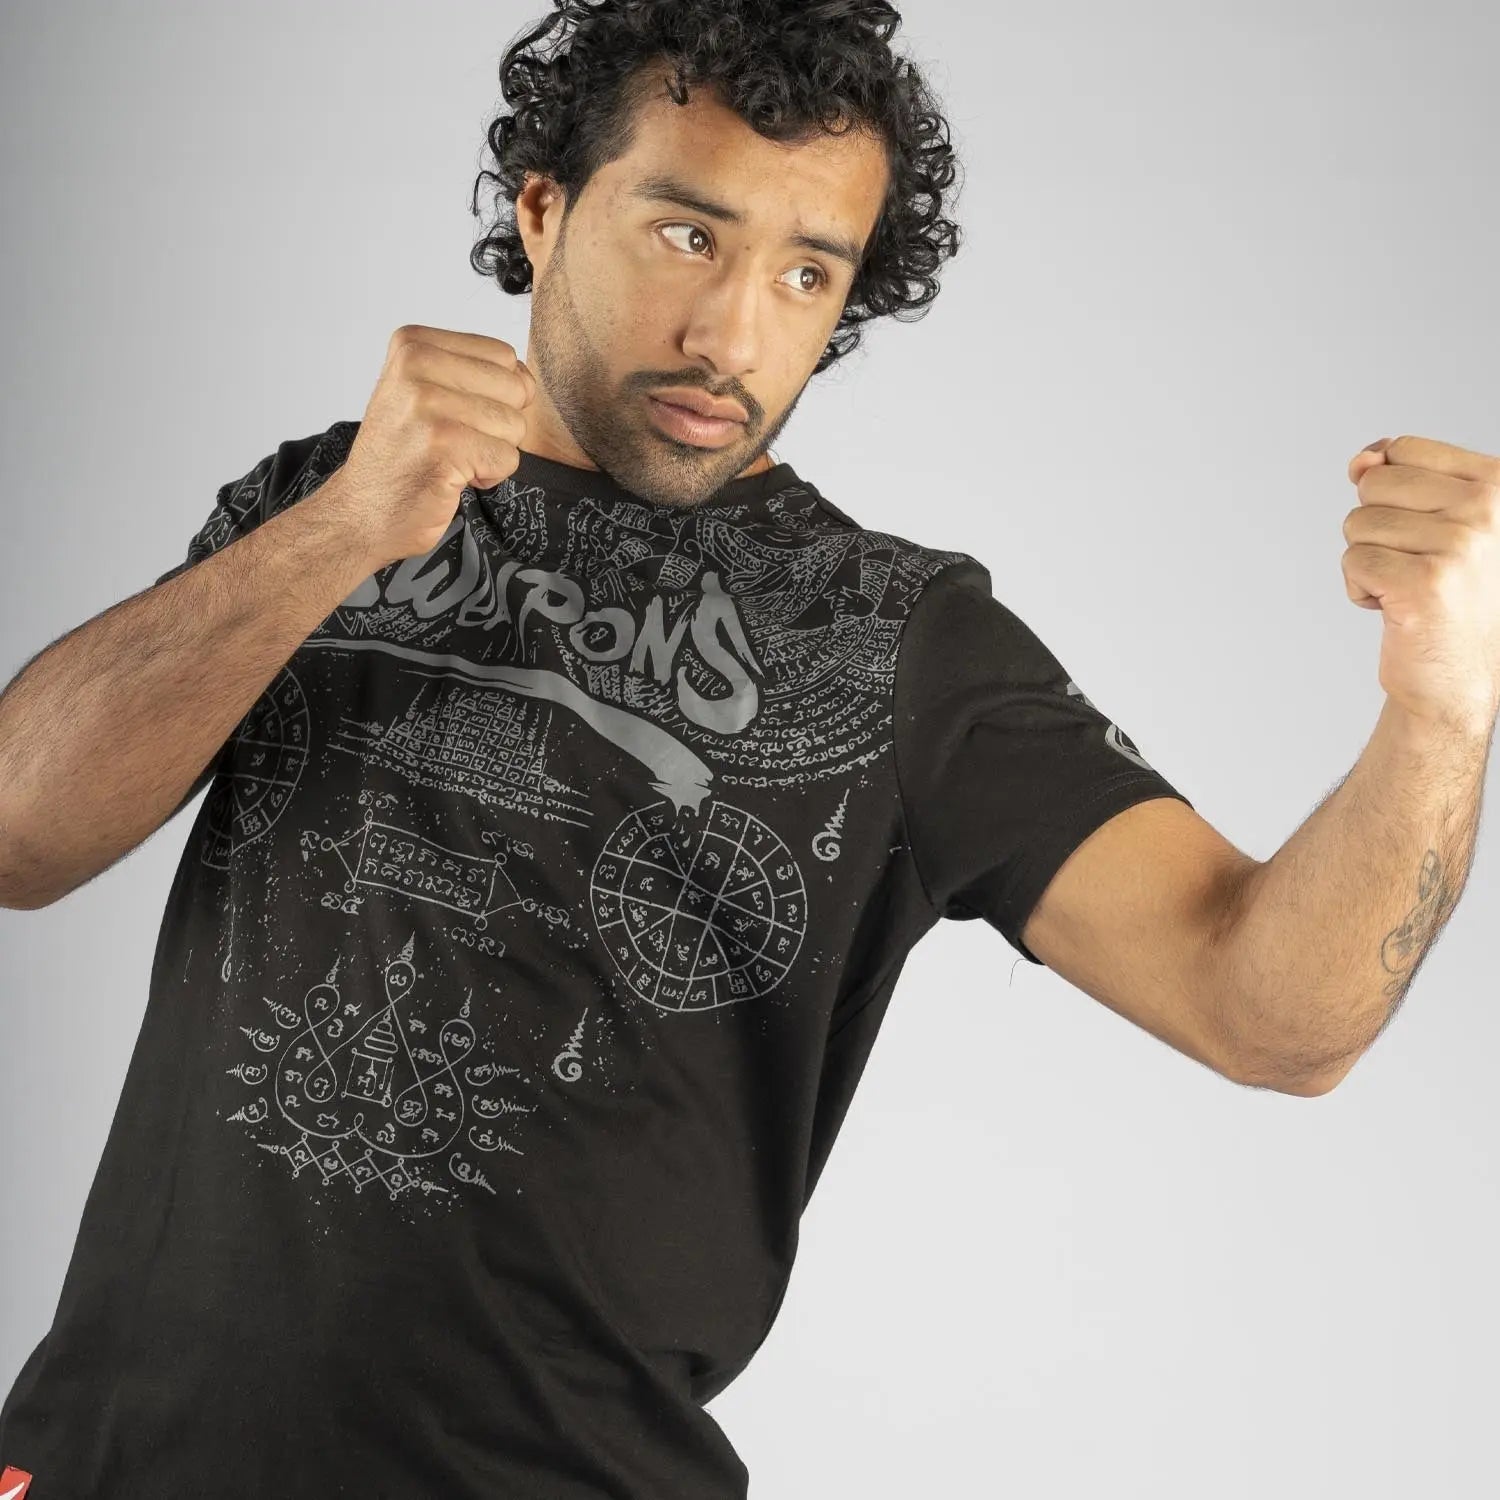 8 WEAPONS T-Shirt - Yantra - Fight Co